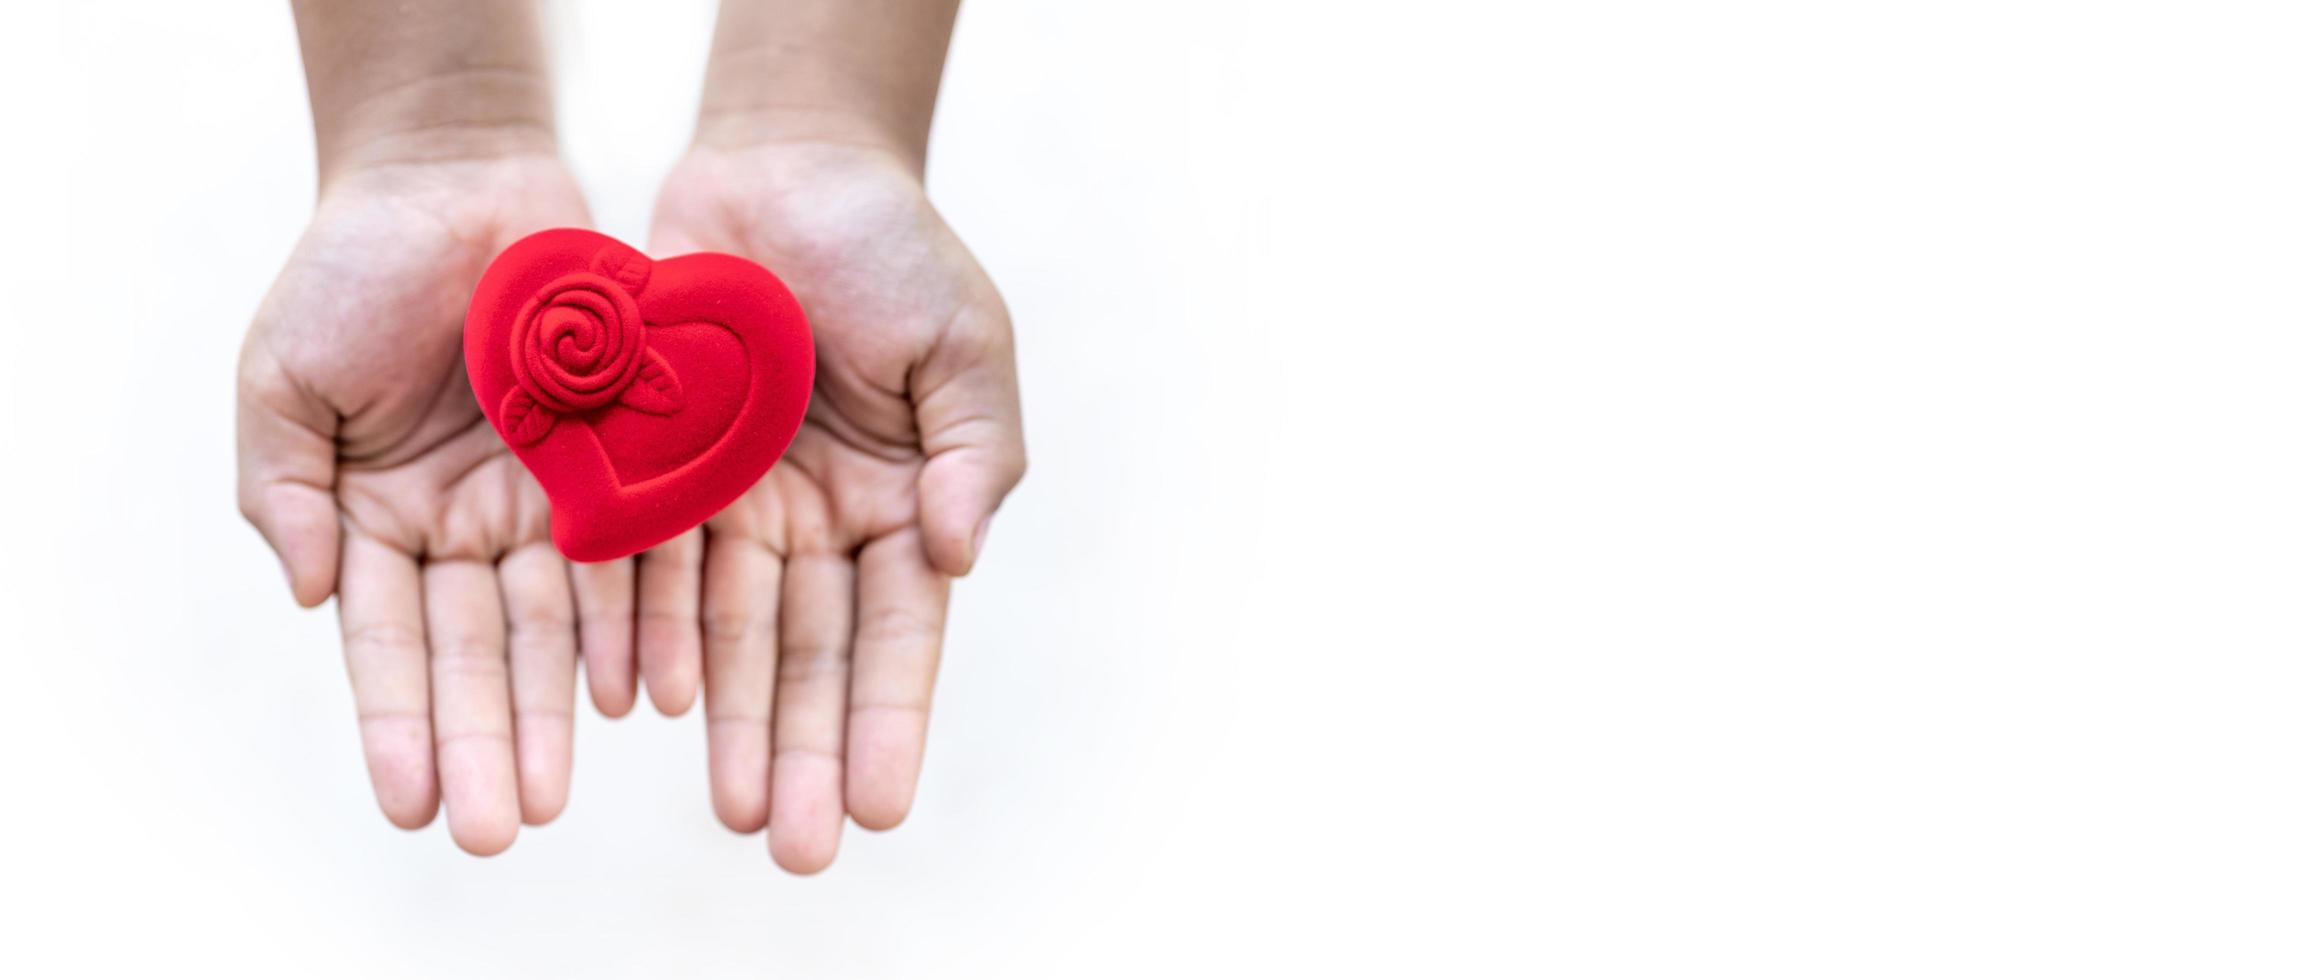 Red heart-shaped box on child's hand, love concept, health care, donate and family insurance concept,world heart day, world health day, concept photo